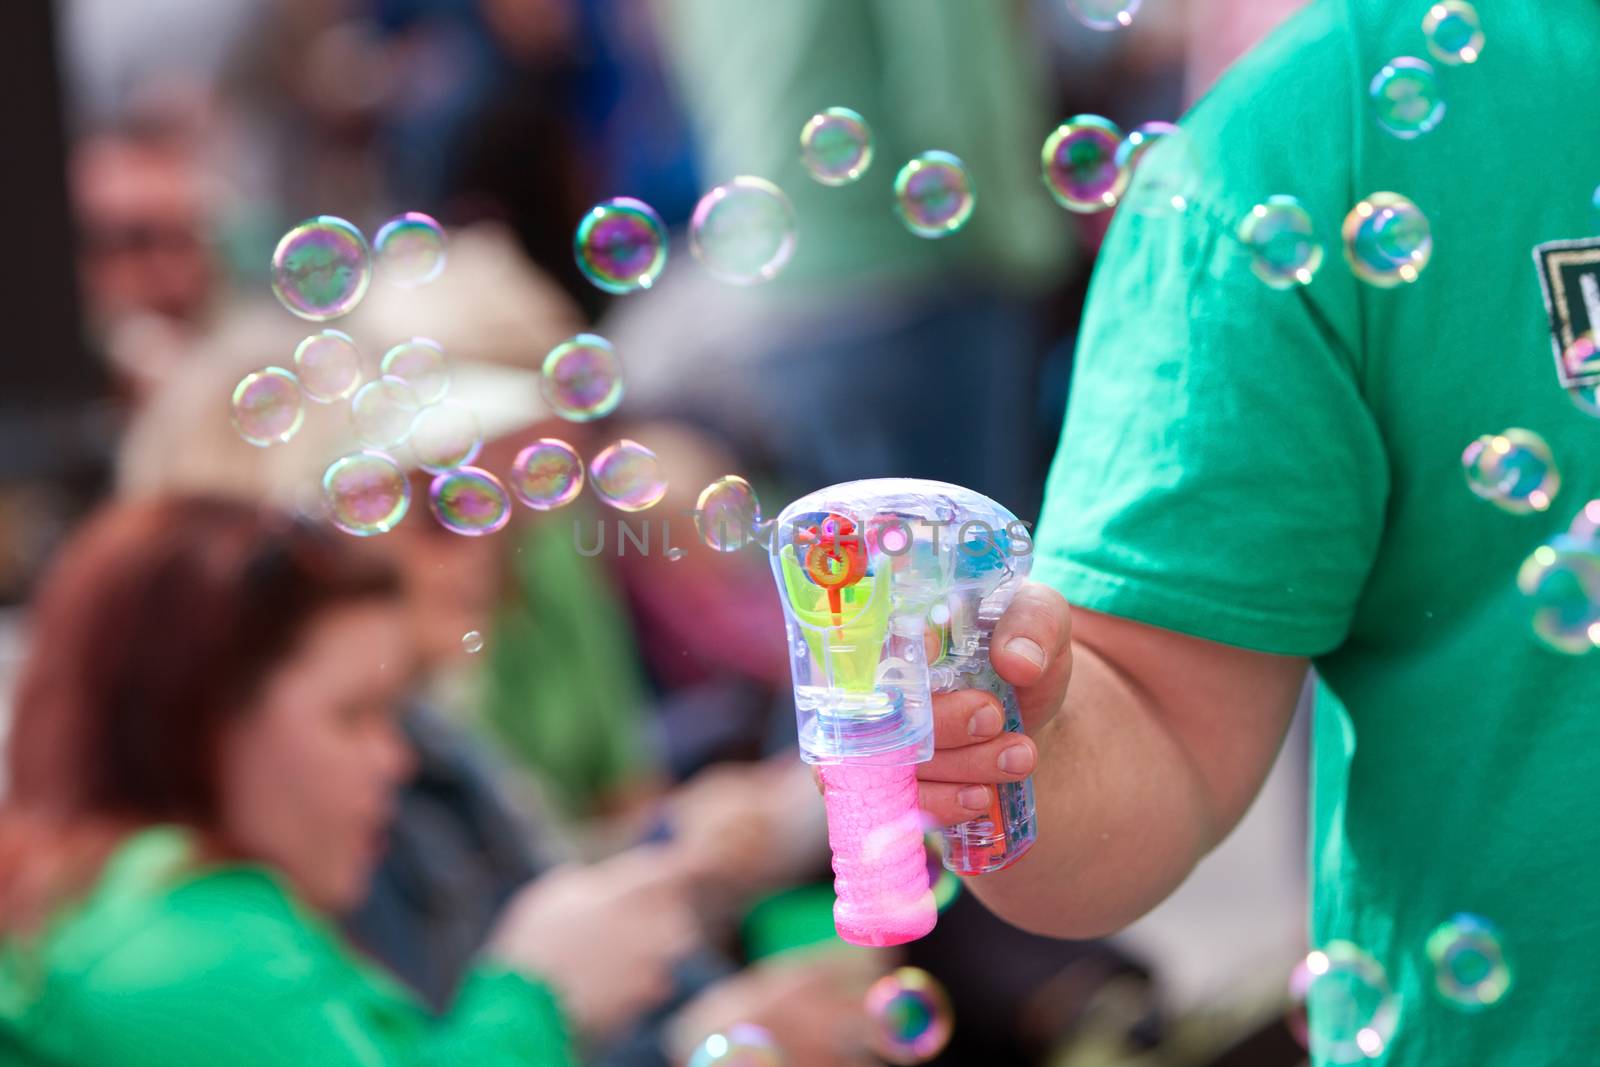 Atlanta, GA, USA - March 15, 2014:  A man uses a bubble gun to blow bubbles at the St. Patrick's Day parade on Peachtree Street.